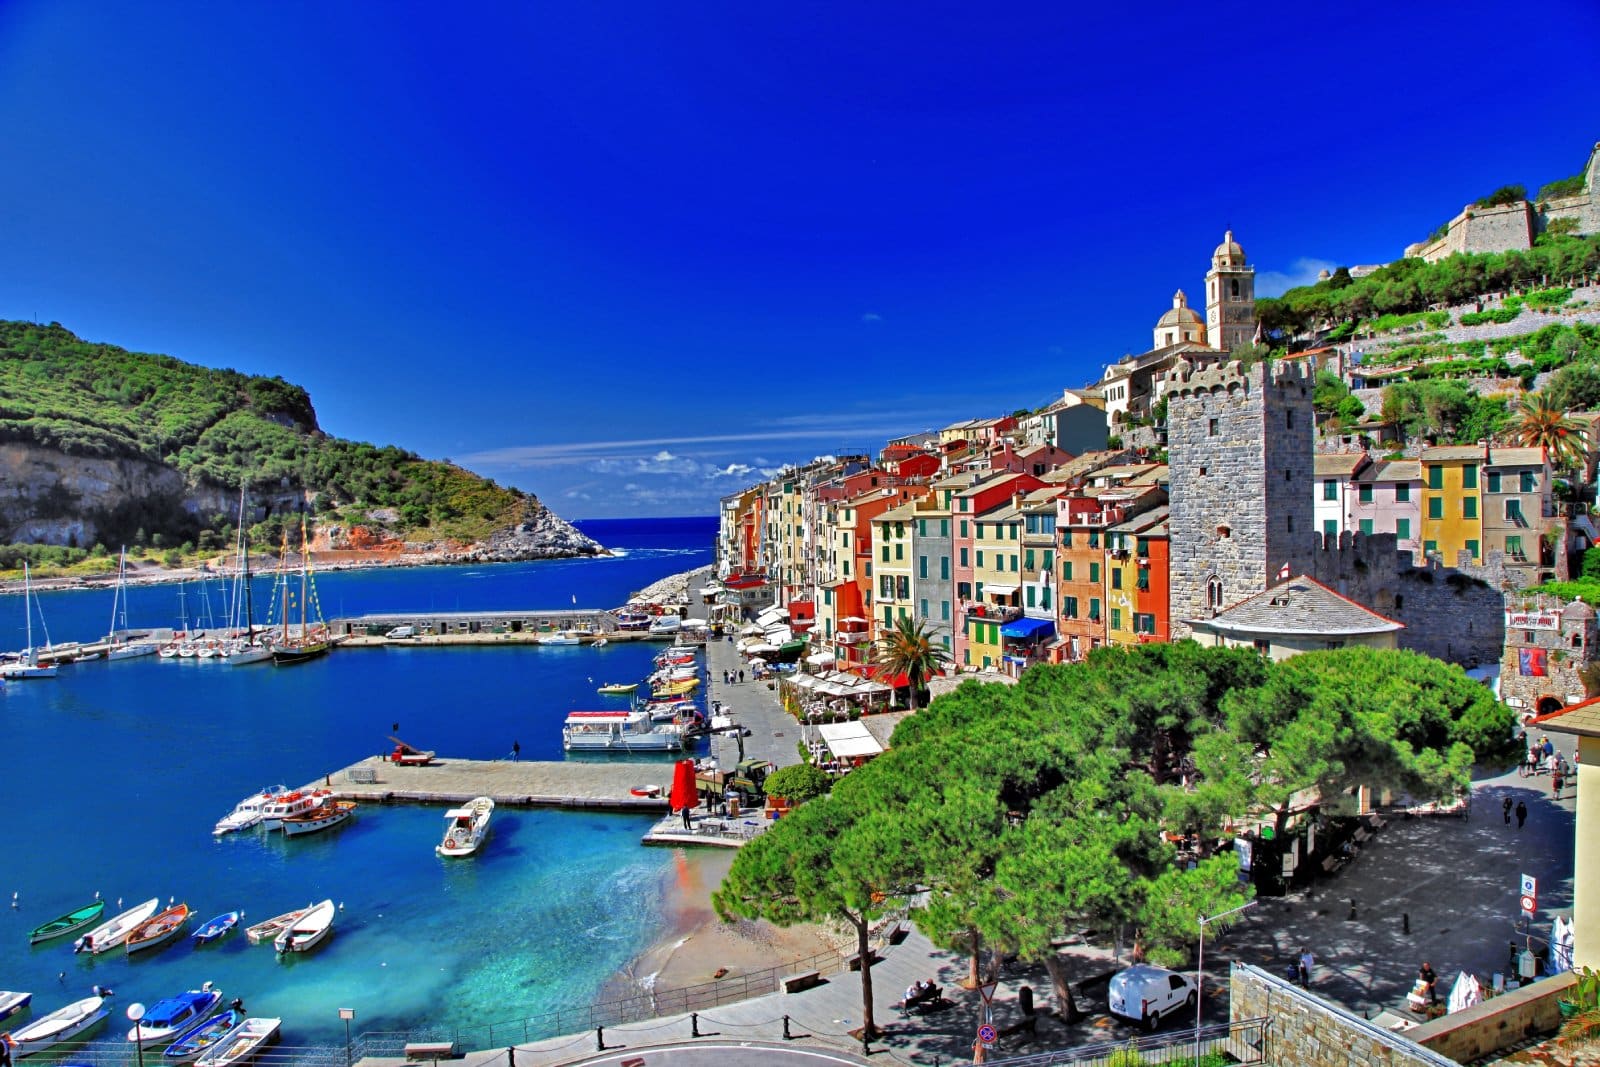 <p class="wp-caption-text">Image Credit: Shutterstock / leoks</p>  <p><span>The Ligurian coast, with Portofino as one of its jewels, is renowned for its extraordinary beauty, characterized by rugged cliffs, turquoise waters, and colorful seaside villages. Portofino itself, a small fishing village turned upscale resort, epitomizes the charm of the Italian Riviera. </span></p>